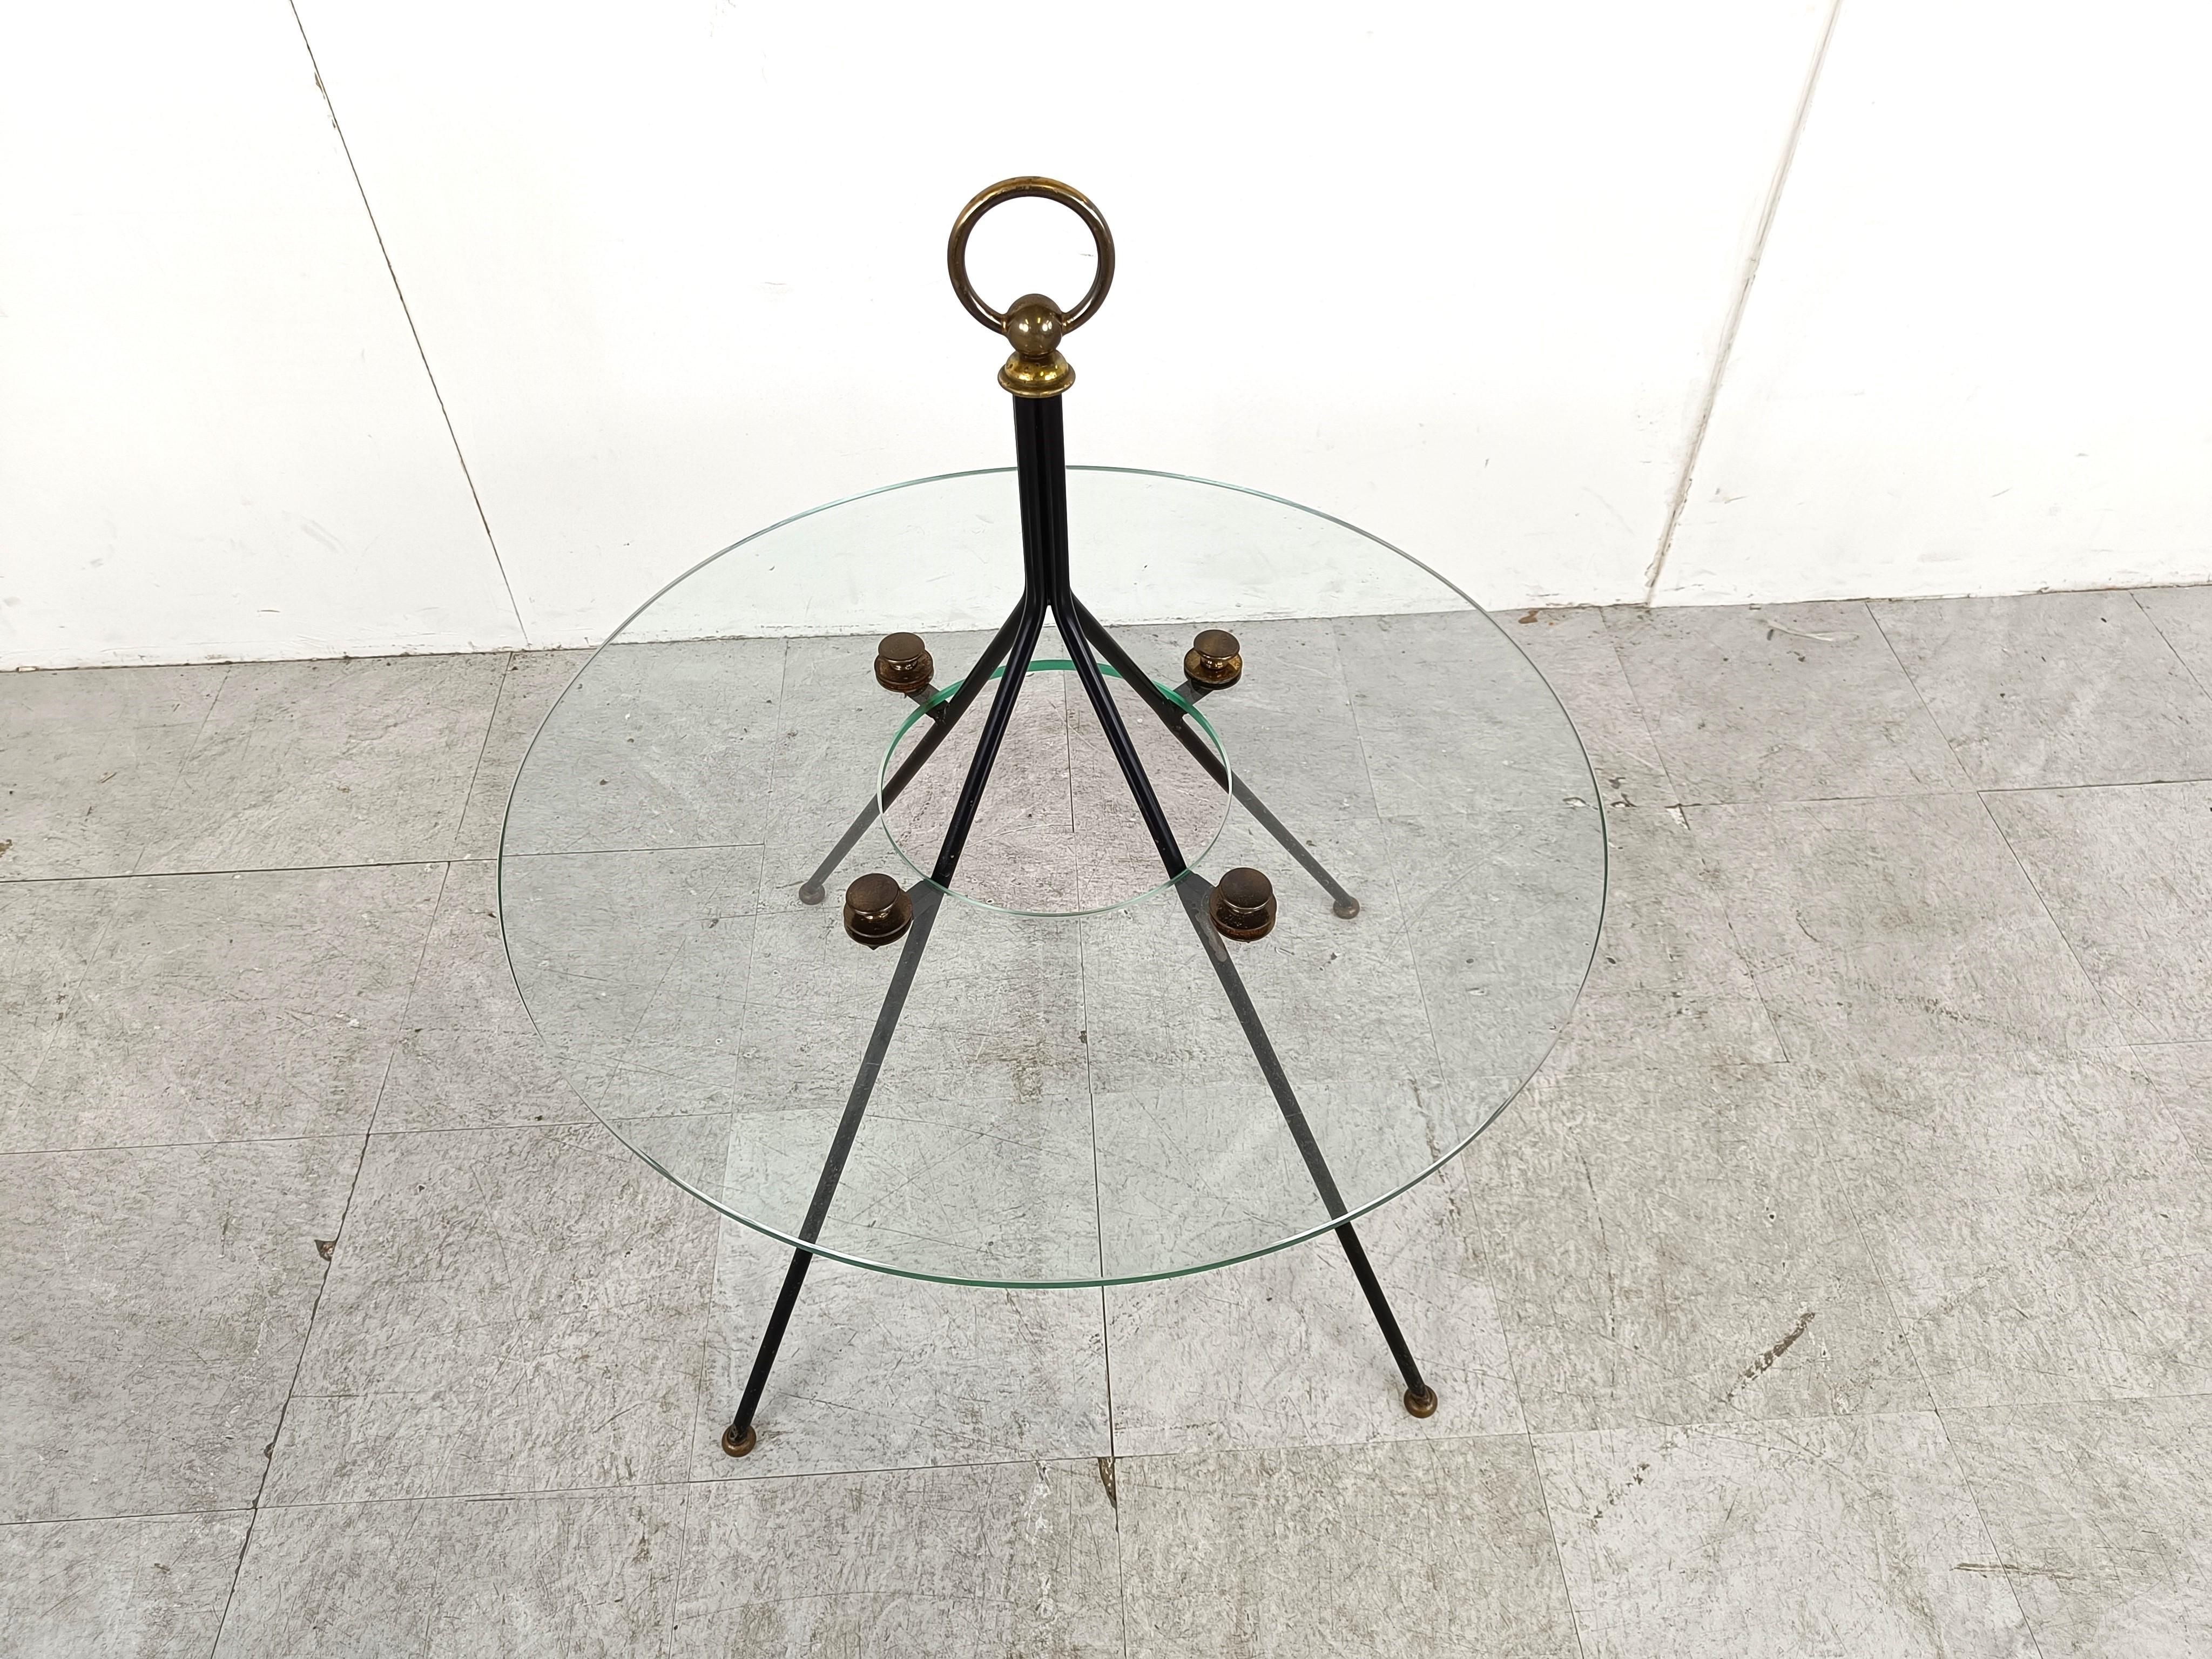 Very rare mid century modern coffee table by Claude Delor.

The coffee table is made out of a black steel base and brass hardware and a round glass table top. 

Very good condition.

1950s - France

Dimensions:
Height: 80cm/31.49